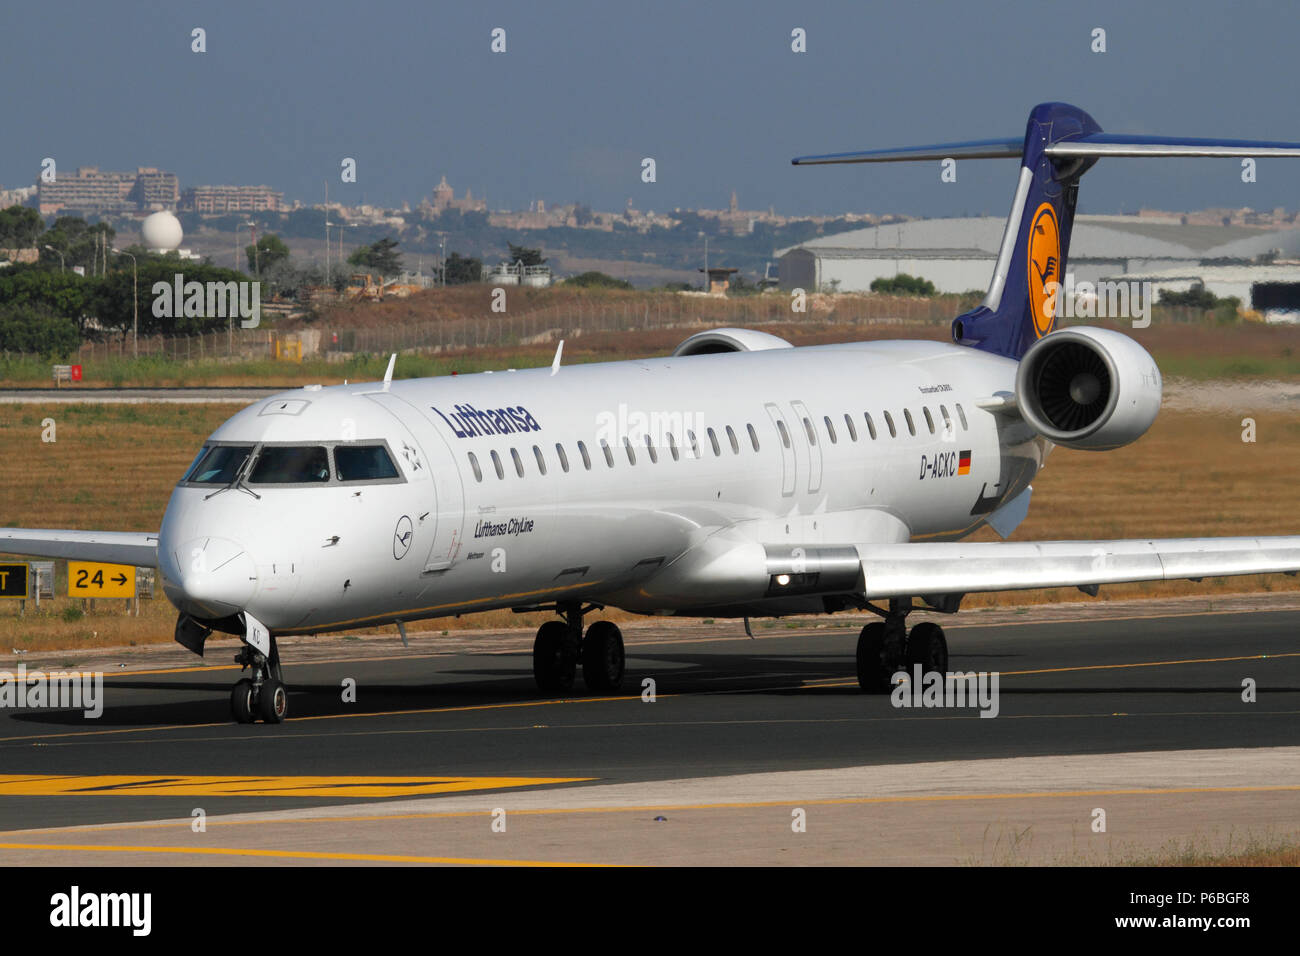 Lufthansa CityLine Bombardier CRJ900 short haul regional jet airliner taxiing for departure on a flight from Malta. Air travel and tourism in the EU. Stock Photo